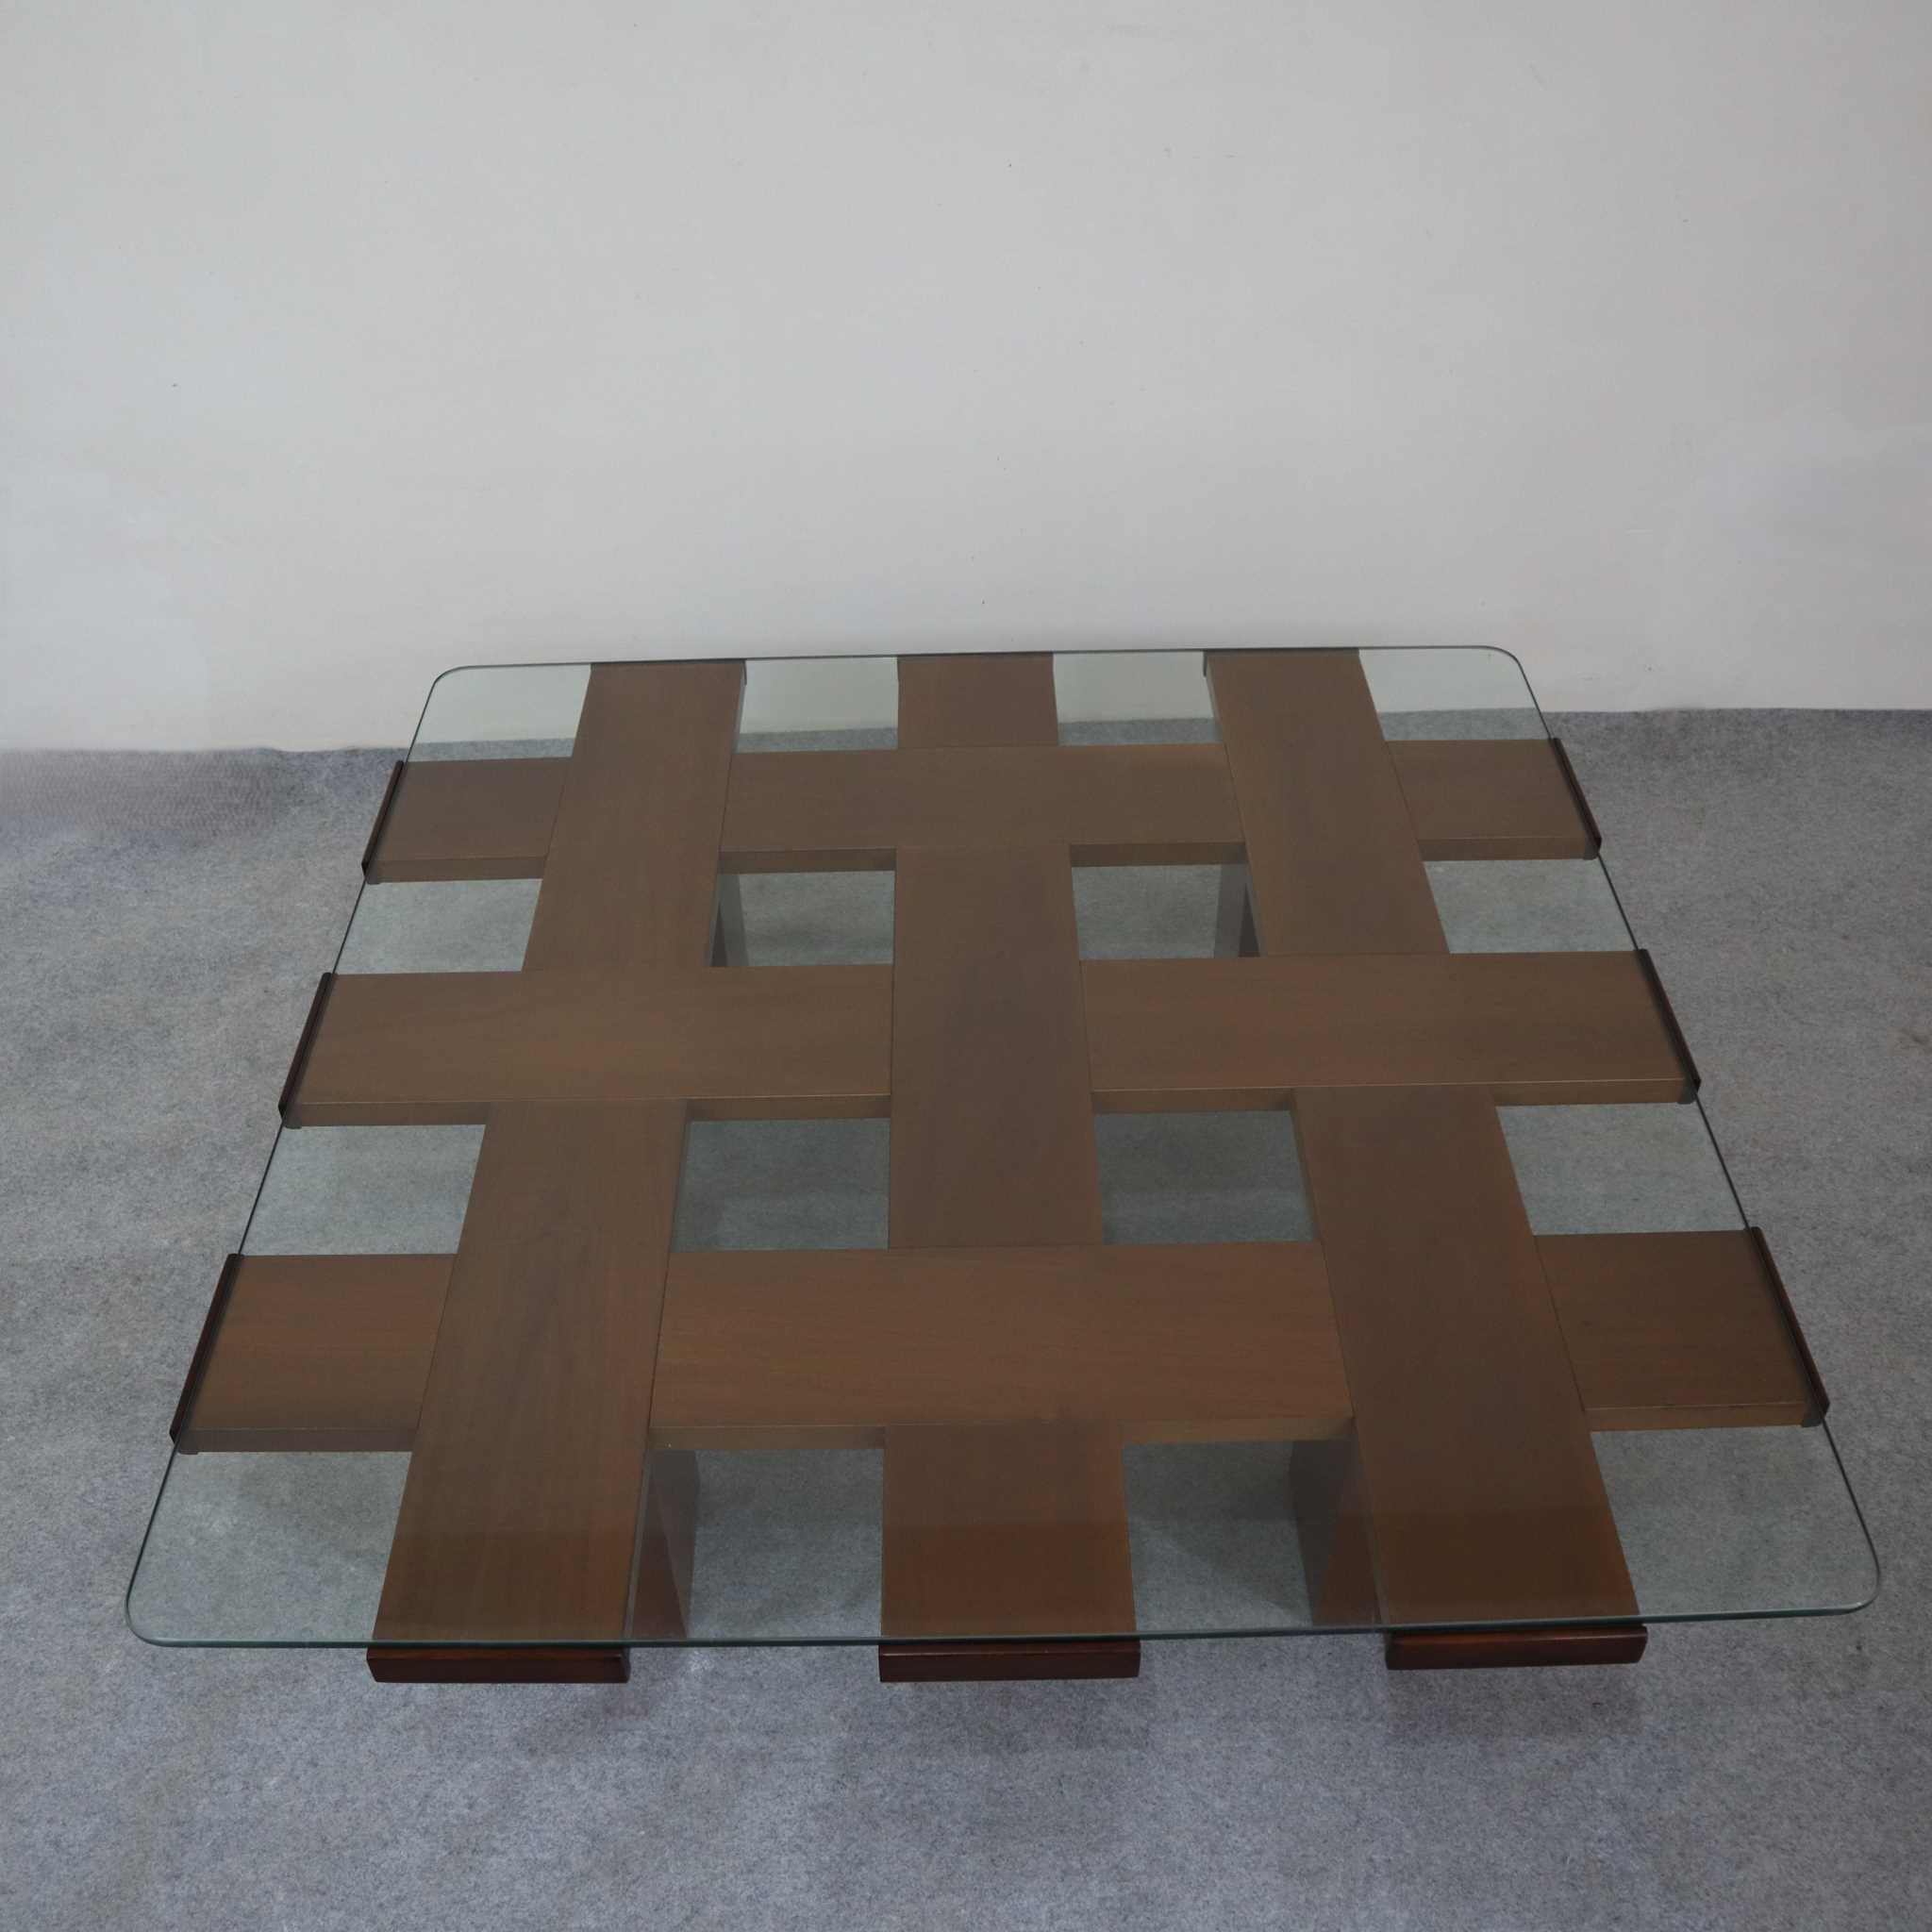 square-coffee-table-1970s-cherry-wood-crystal-bernini-style-high-frontal-viewvisionidepoca